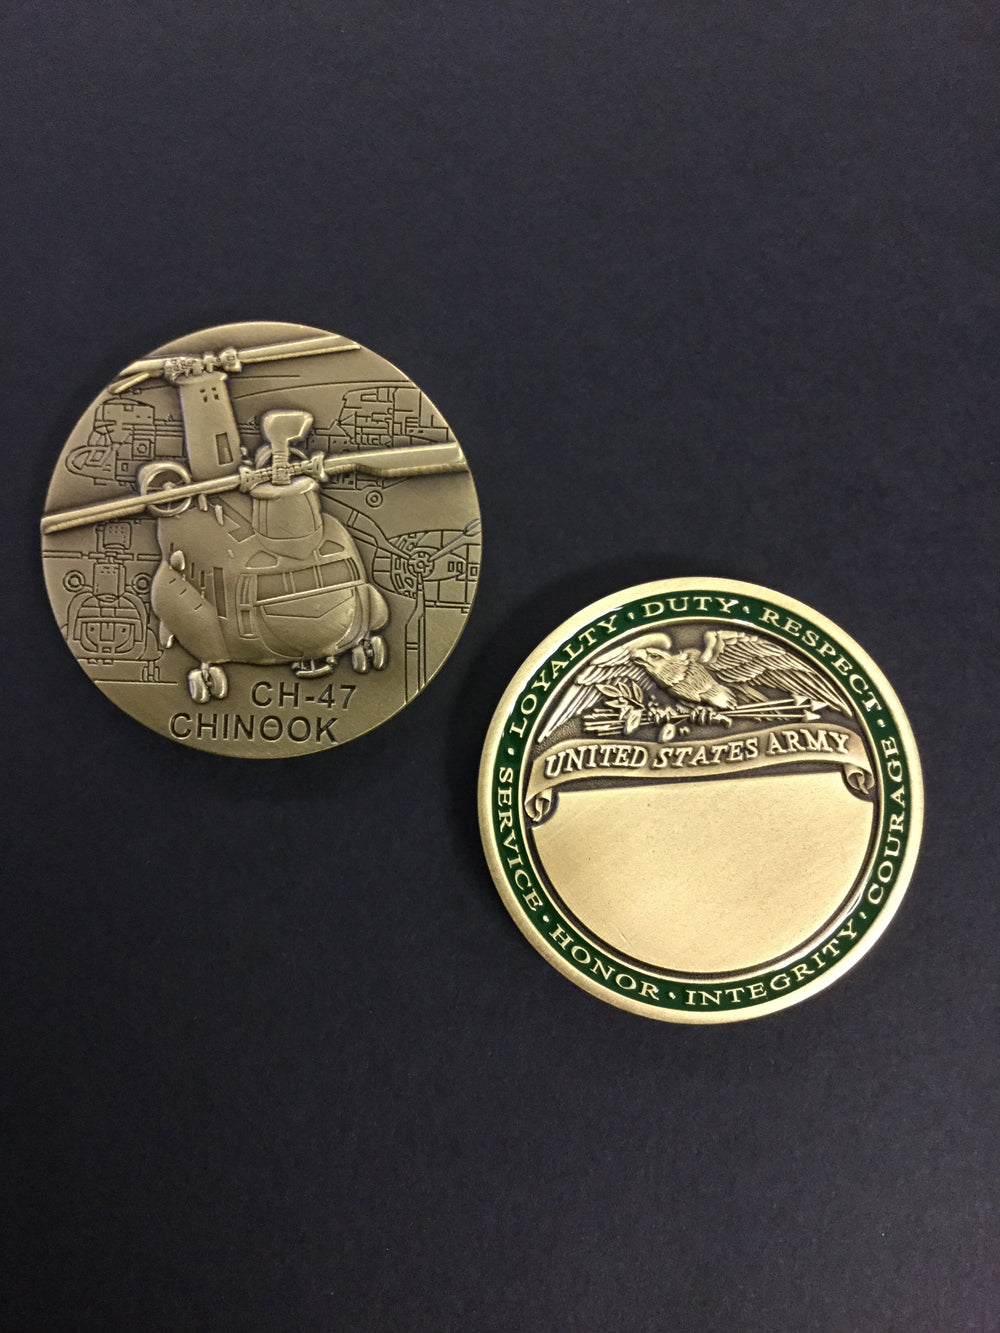 CH-47 Chinook Helicopter Coin